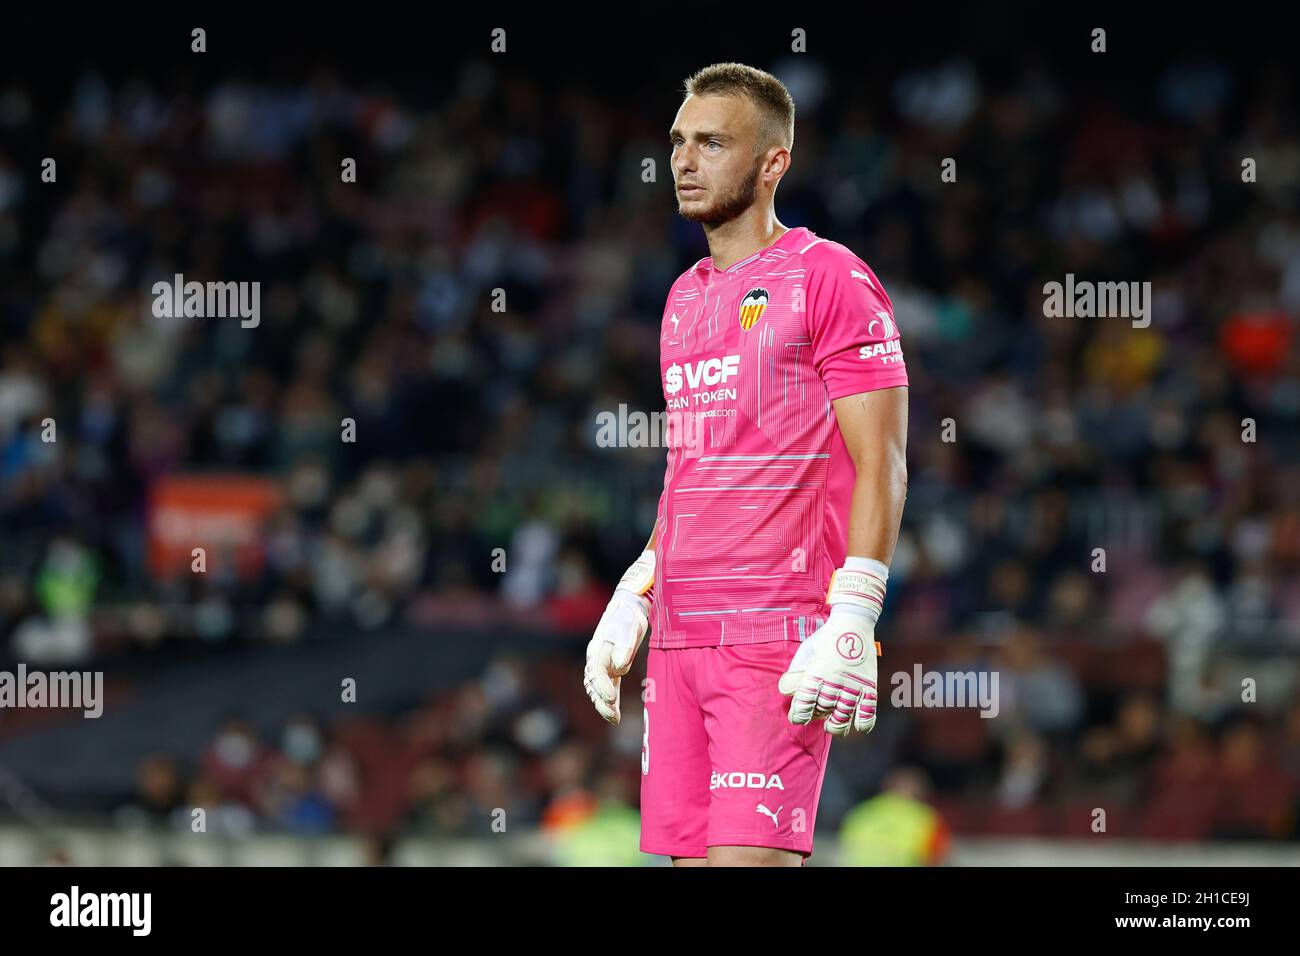 Barcelona, Spain. 17th Oct, 2021. Jasper Cillessen of Valencia CF during the Liga match between FC Barcelona and Valencia CF at Camp Nou in Barcelona, Spain. Credit: DAX Images/Alamy Live News Stock Photo